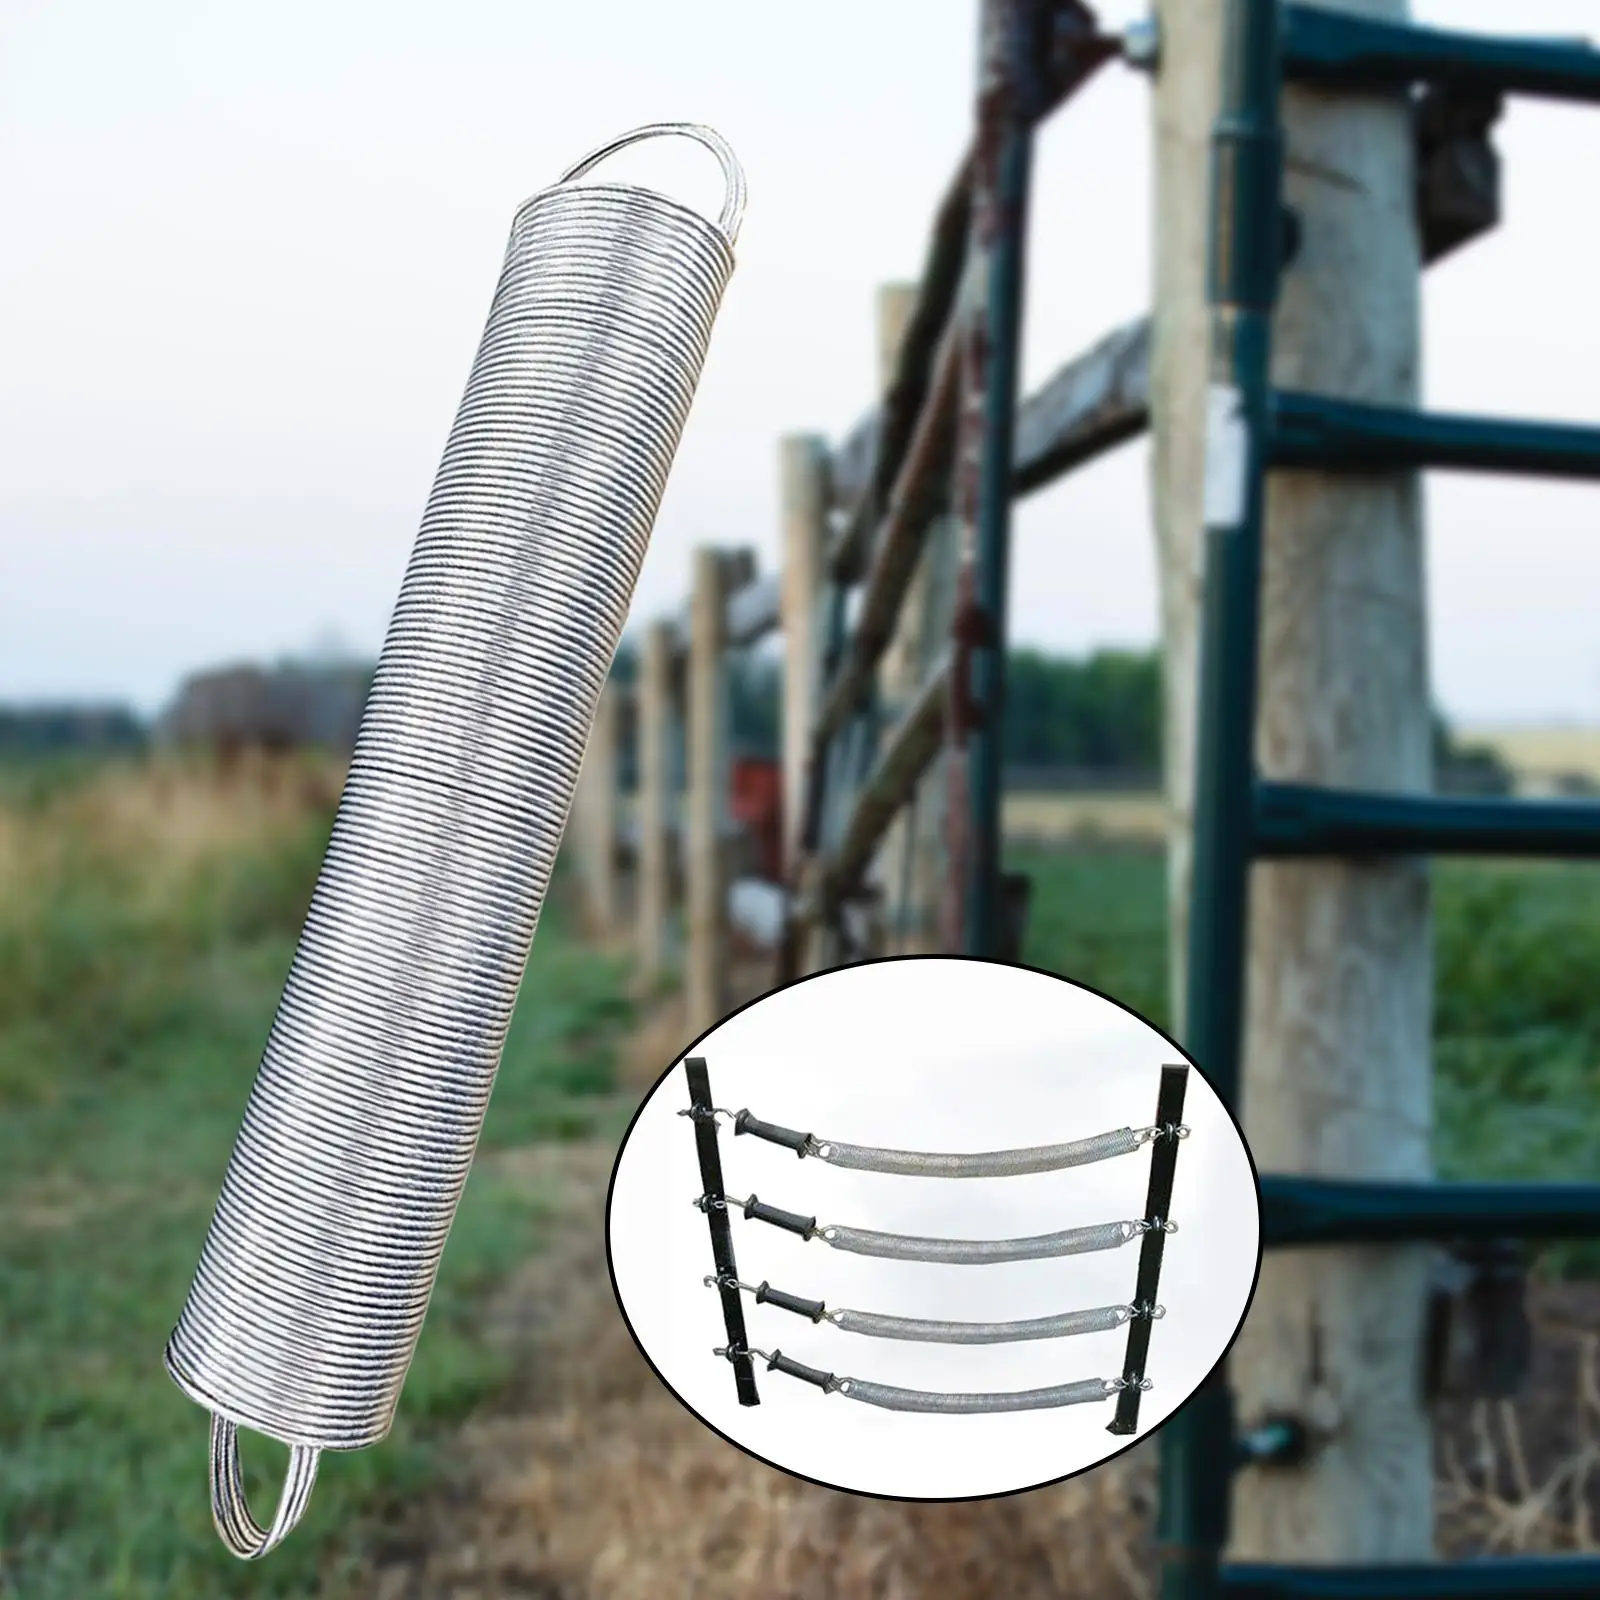 Electric Fence Retractable Spring Gate Handle Tension Spring for Livestock Fencing Supplies Preventing Animals Intruding